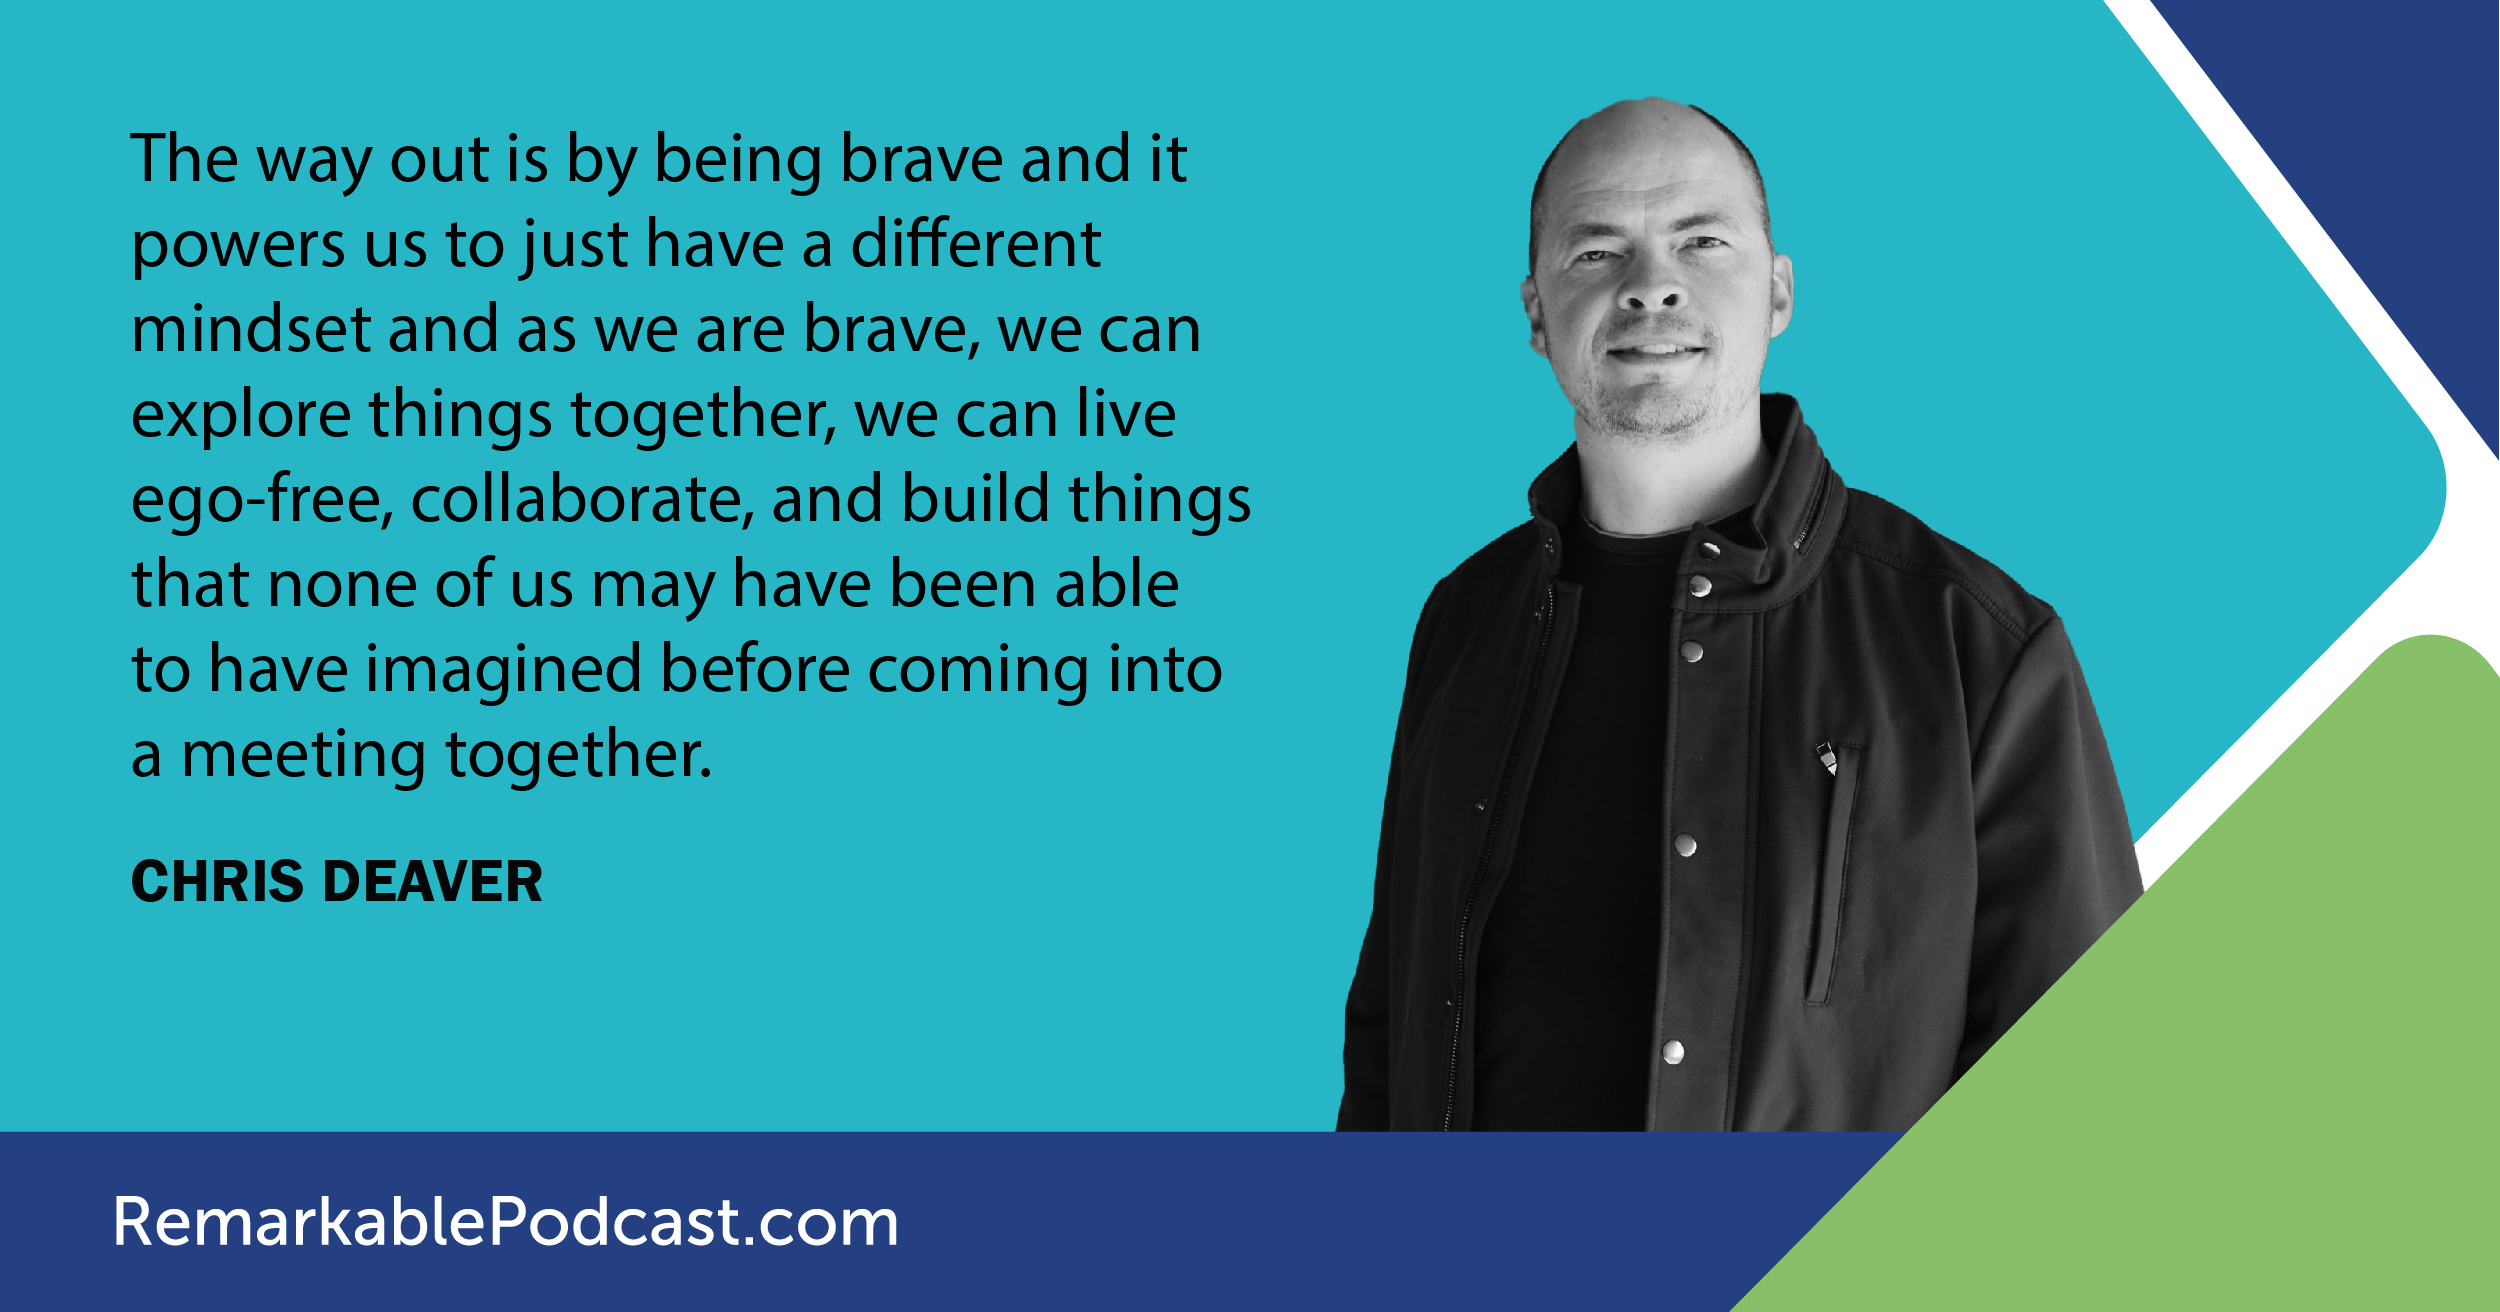 The way out is by being brave and it powers us to just have a different mindset and as we are brave, we can explore things together, we can live ego-free, collaborate, and build things that none of us may have been able to have imagined before coming into a meeting together. – Chris Deavers 